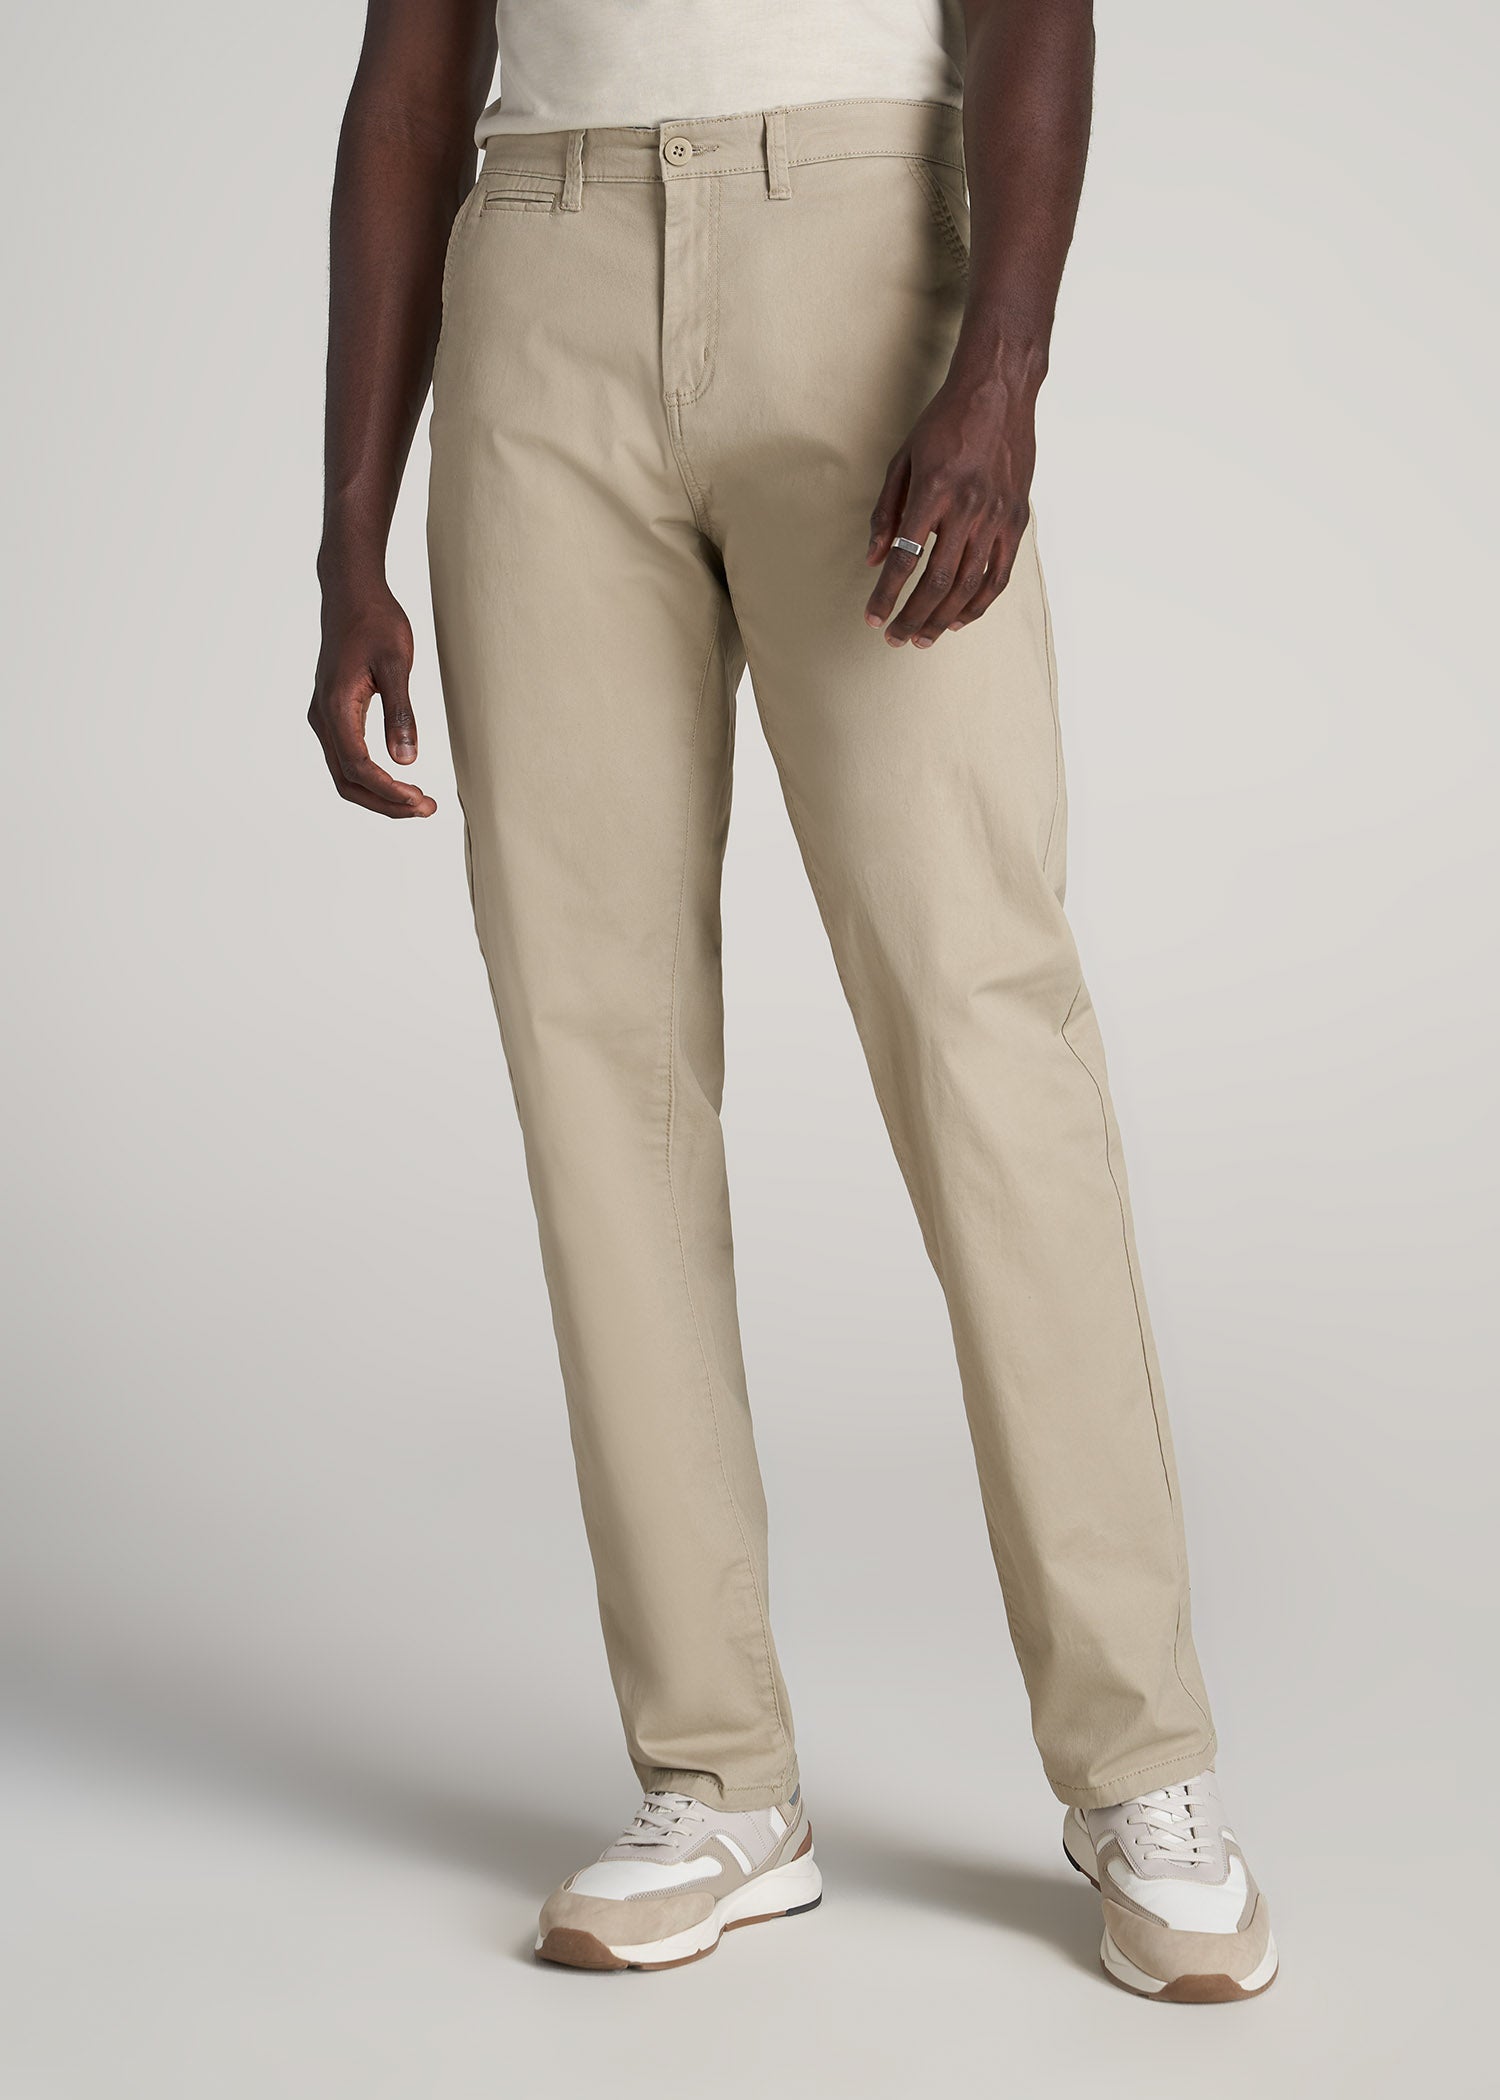 $59 Jeans and Chinos